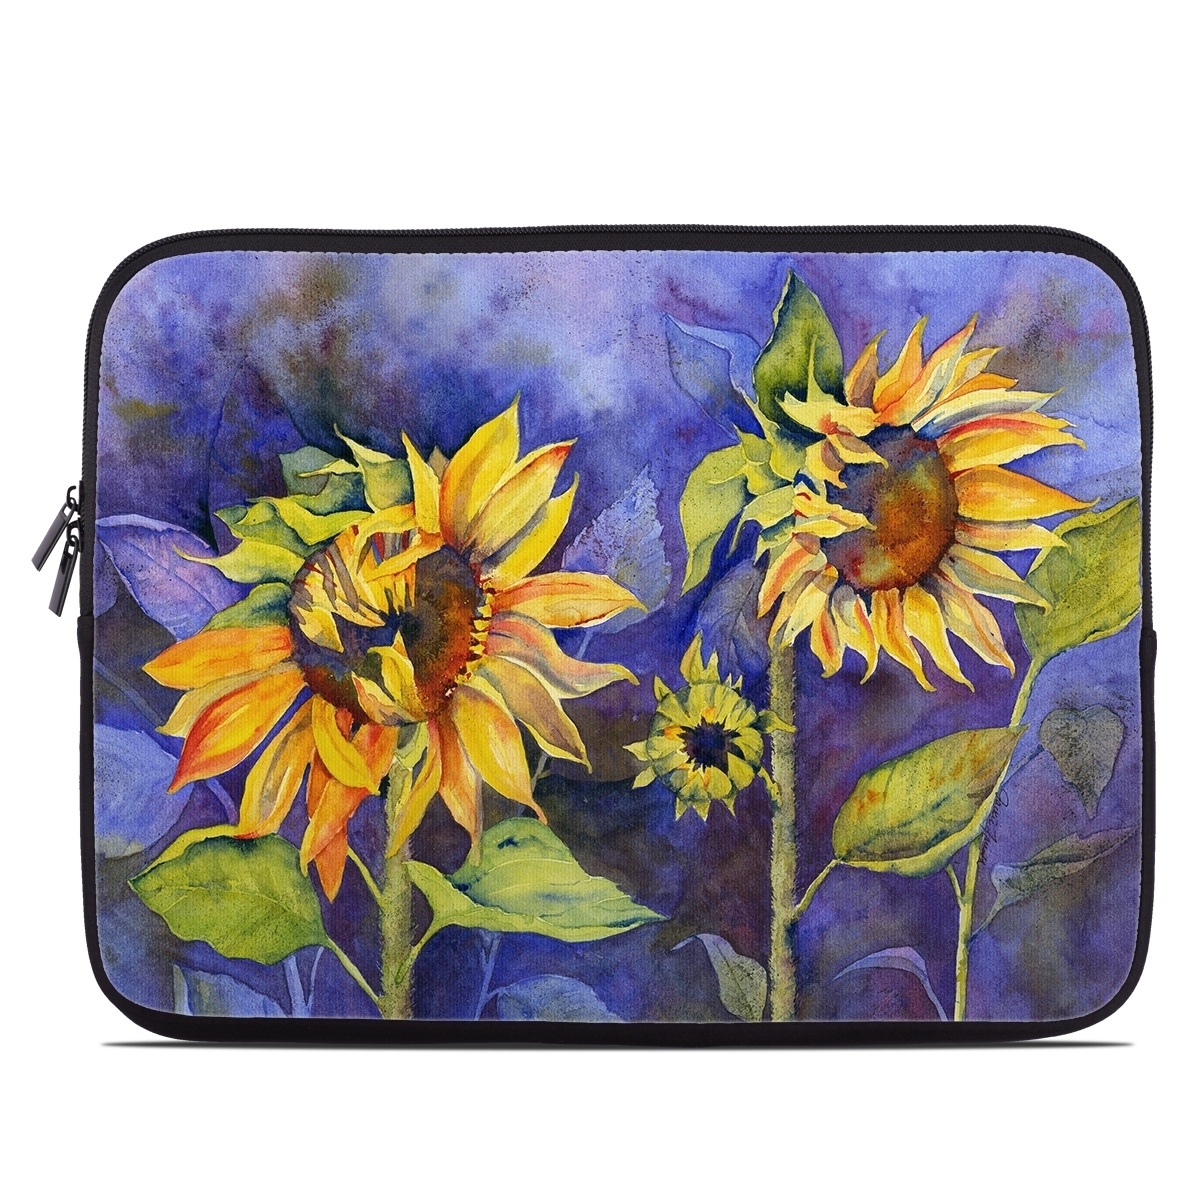 Laptop Sleeve - Day Dreaming (Image 1)